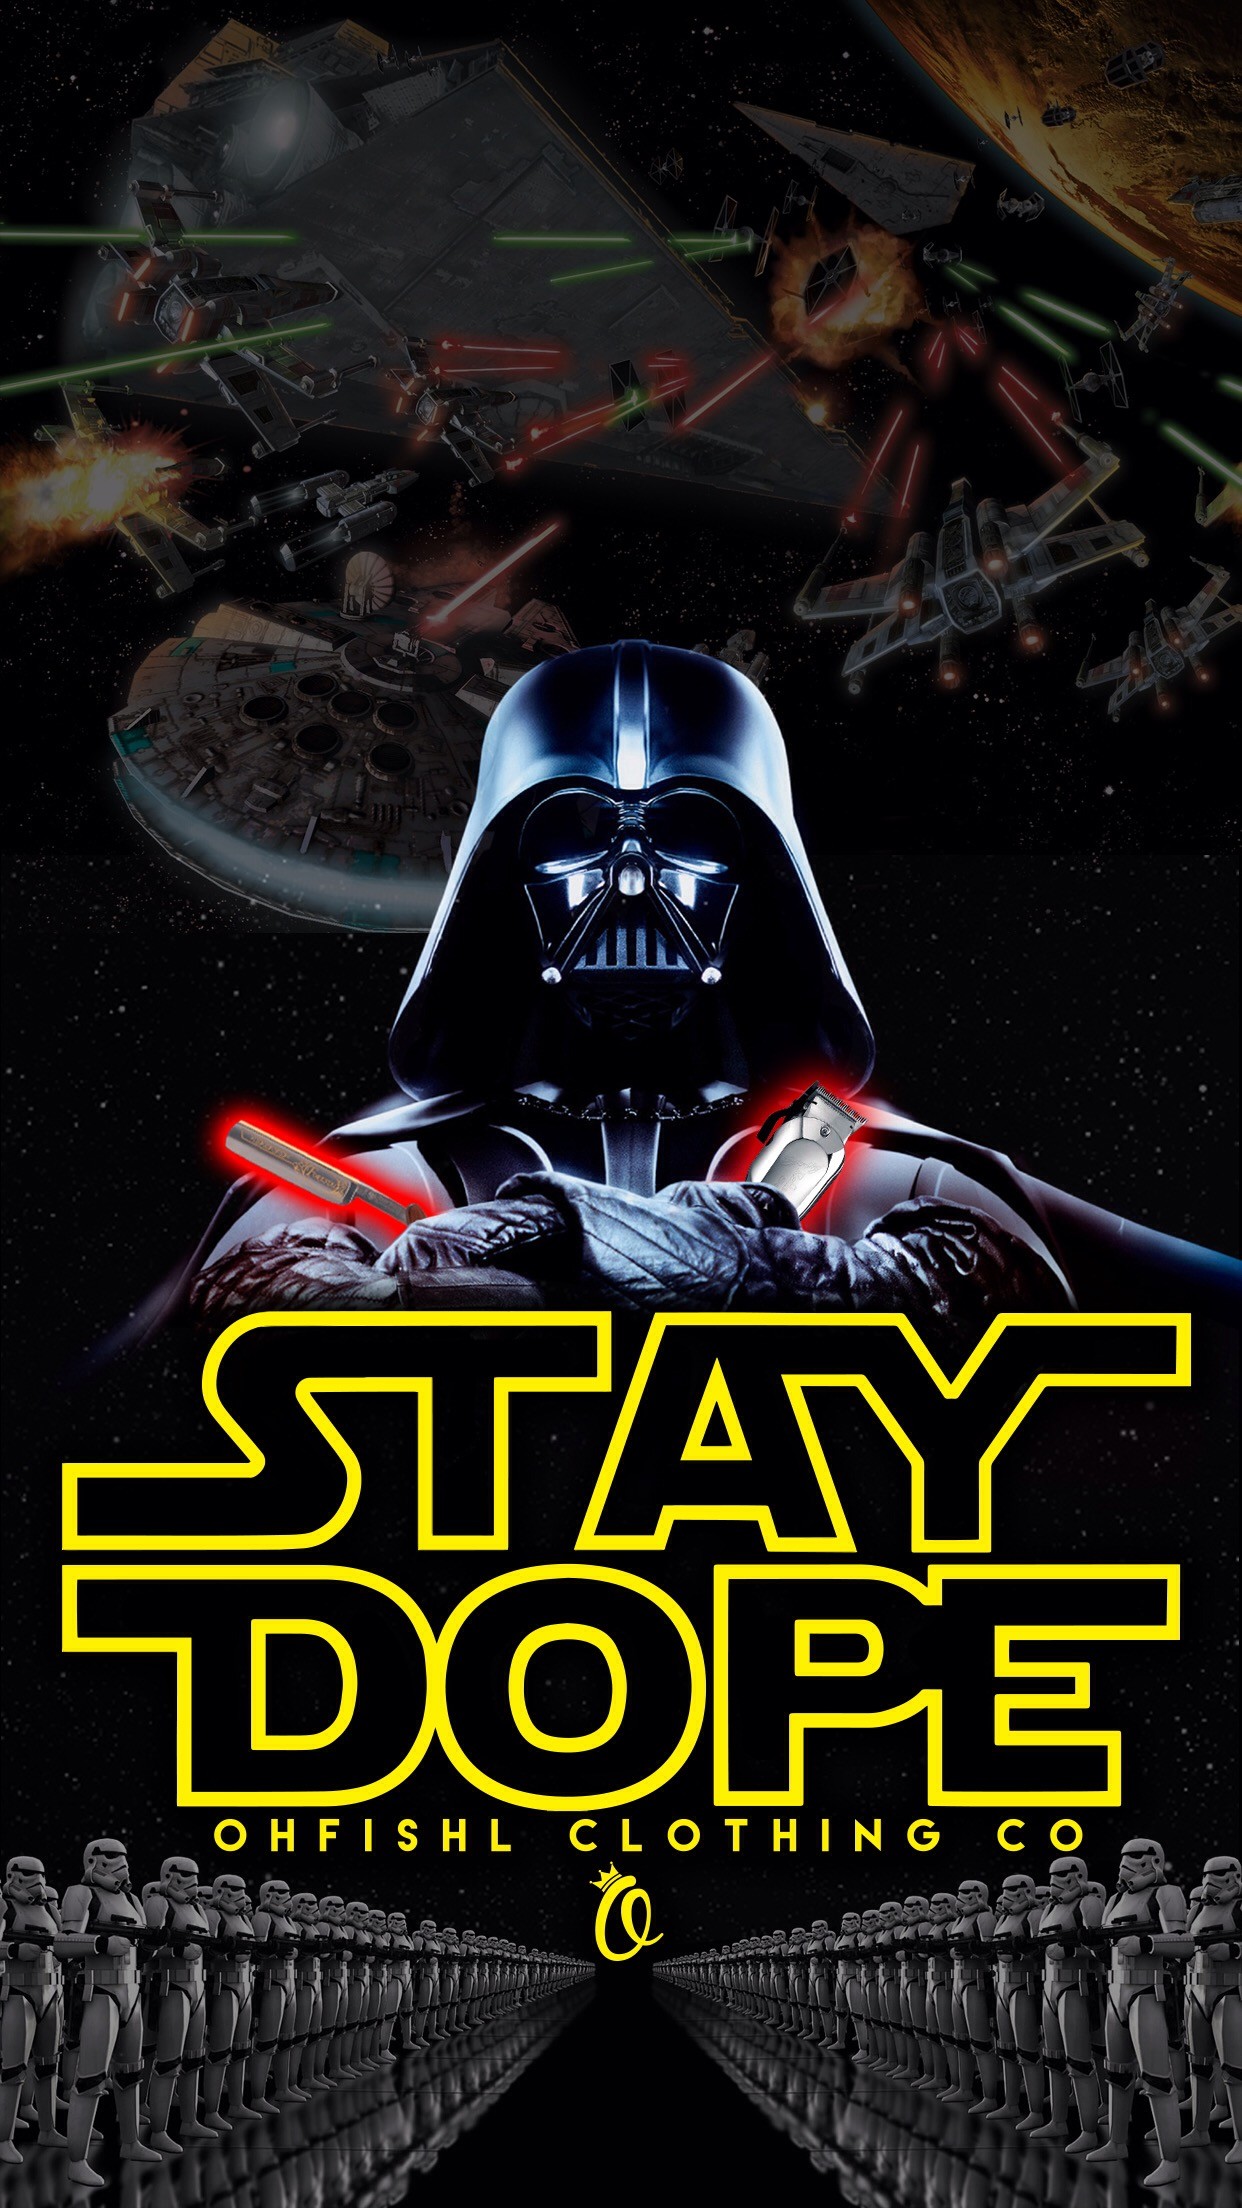 supreme iphone 6 wallpaper,darth vader,supervillain,ghost,fictional character,poster